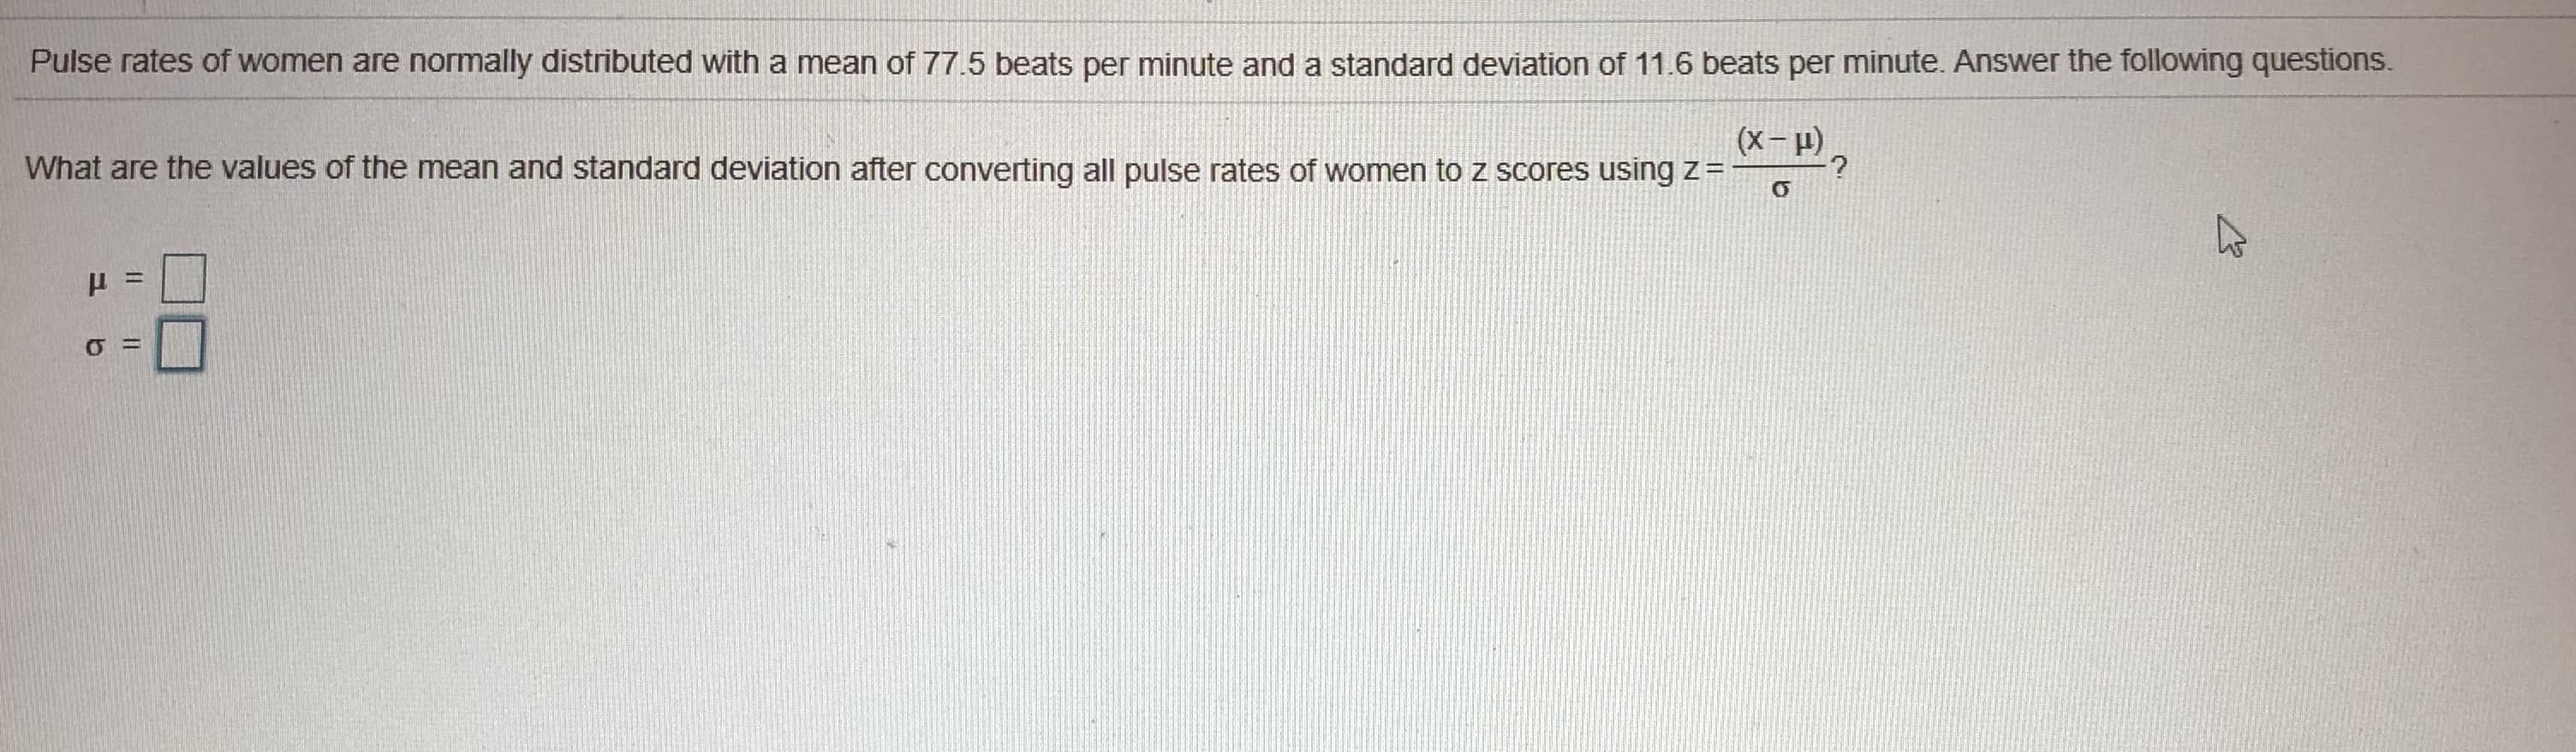 Pulse rates of women are normally distributed with a mean of 77.5 beats per minute and a standard deviation of 11.6 beats per minute. Answer the following questions.
(X-2
What are the values of the mean and standard deviation after converting all pulse rates of women to z scores using z=
